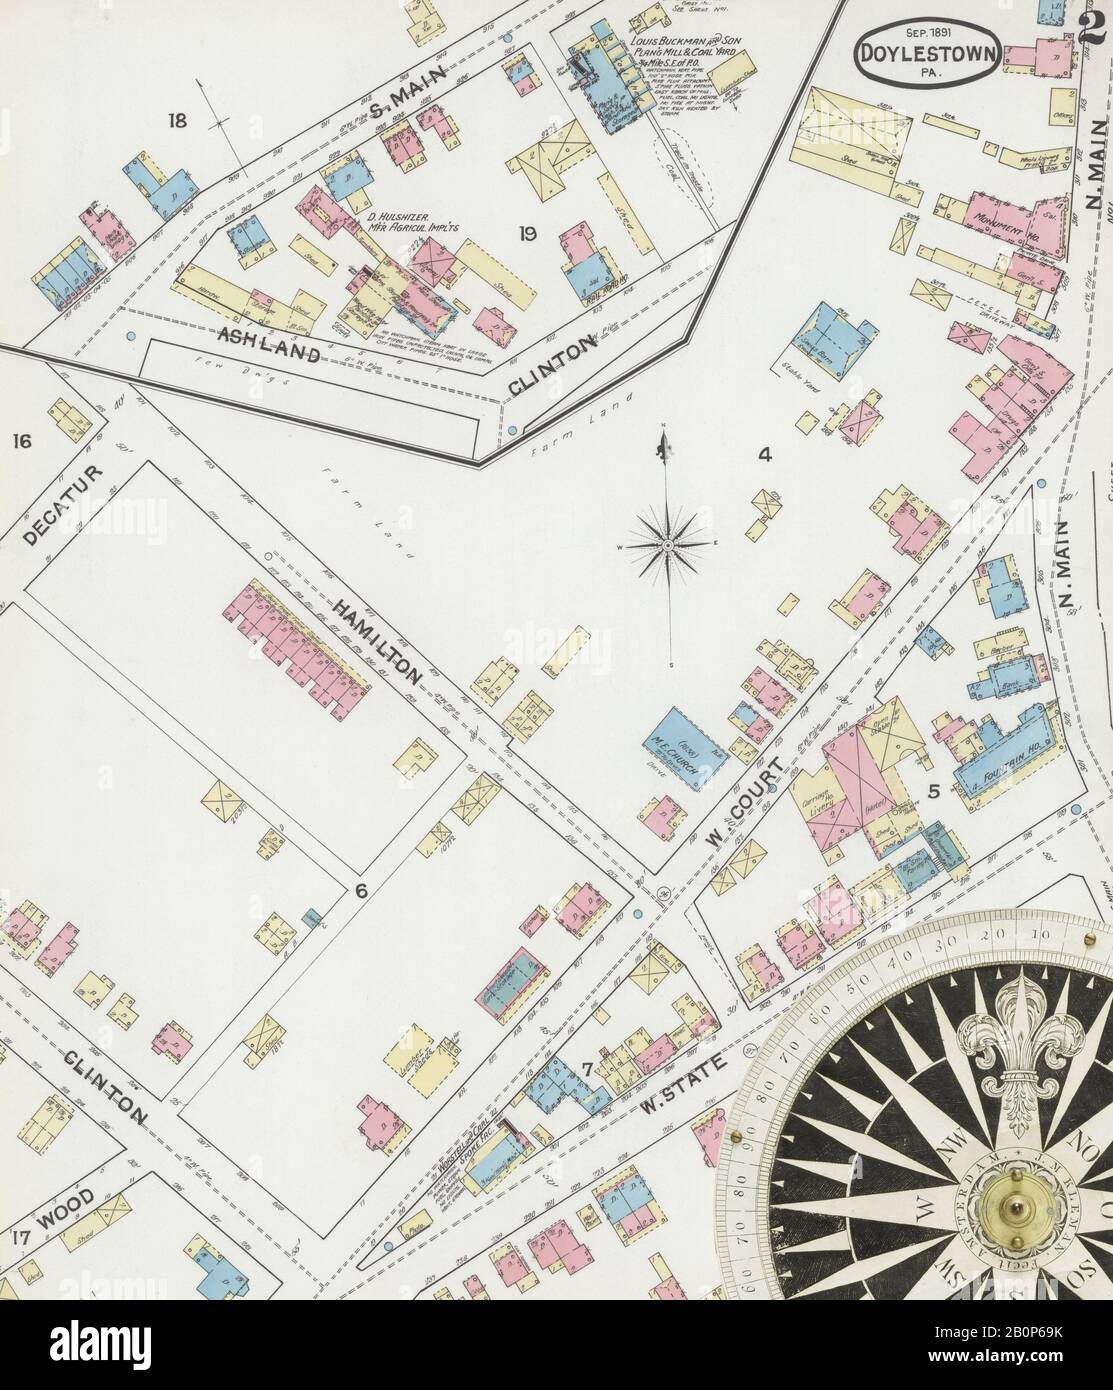 Image 2 Of Sanborn Fire Insurance Map From Doylestown Bucks County Pennsylvania Sep 1891 2 Sheets America Street Map With A Nineteenth Century Compass 2B0P69K 